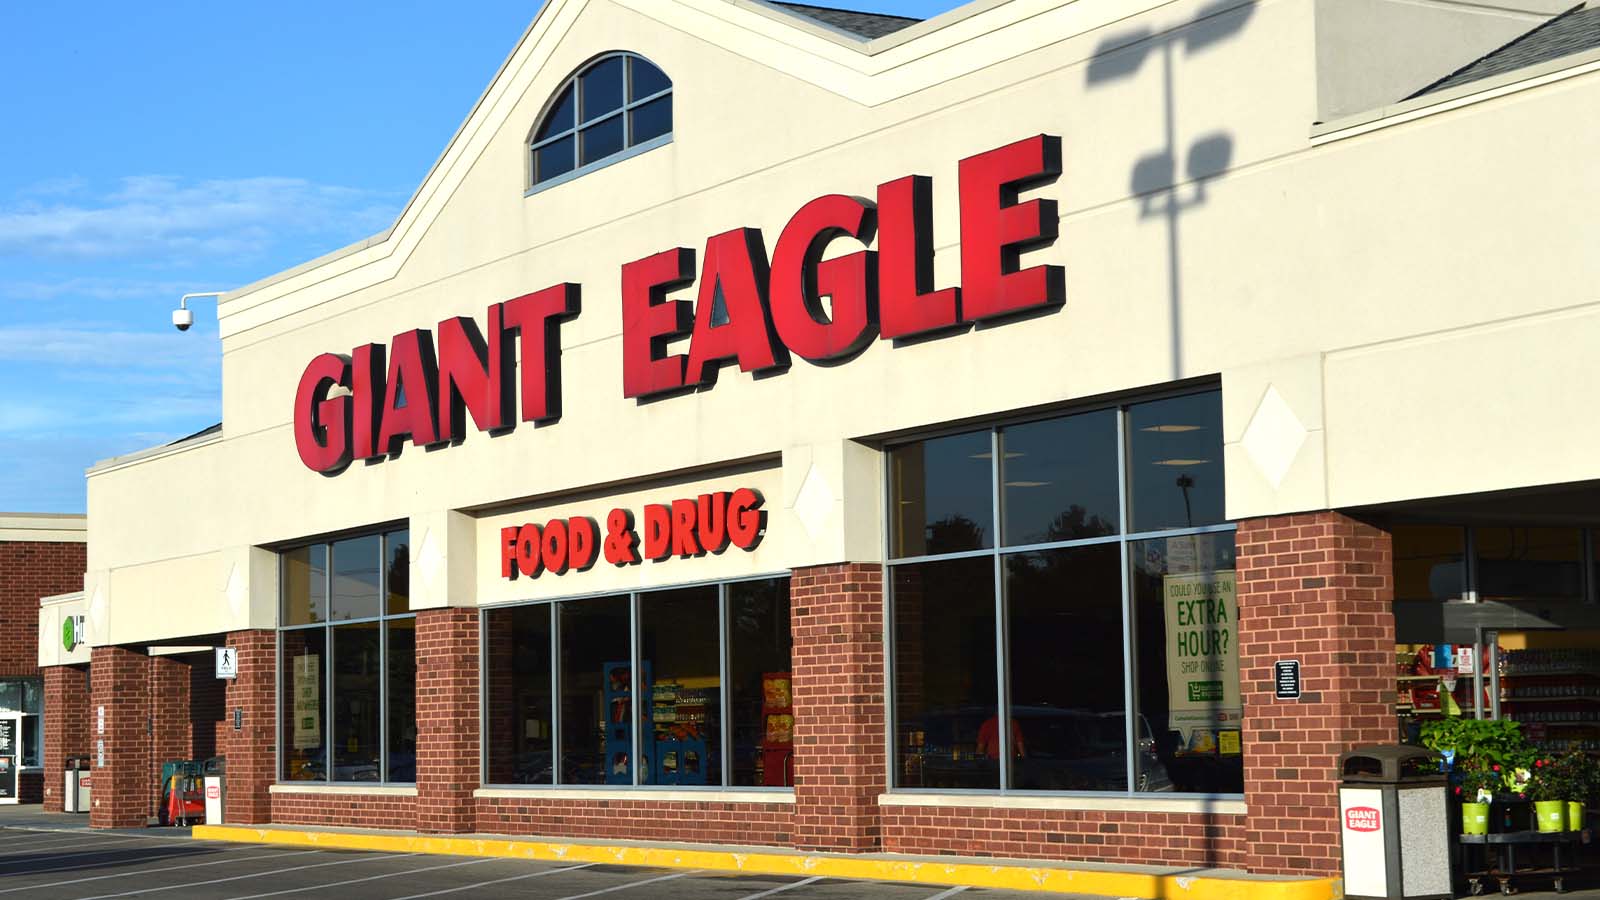 Giant Eagle grocery store